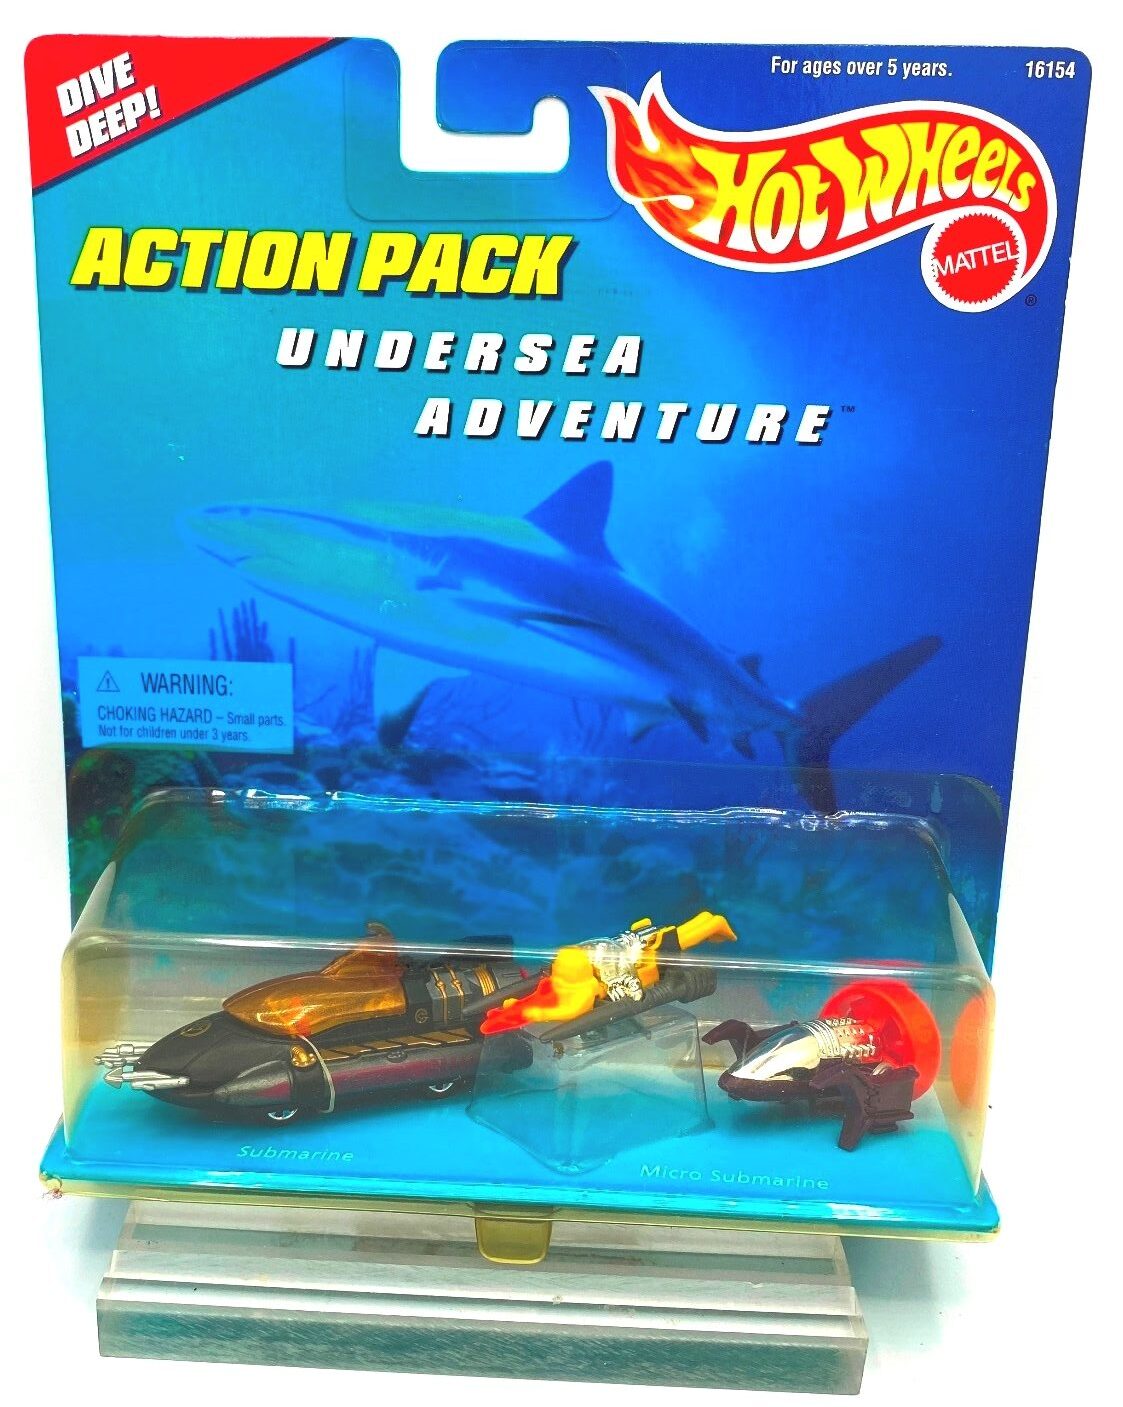 HOT WHEELS ACTION PACK UNDER SEA ADVENTURE NEW IN PACKAGE 